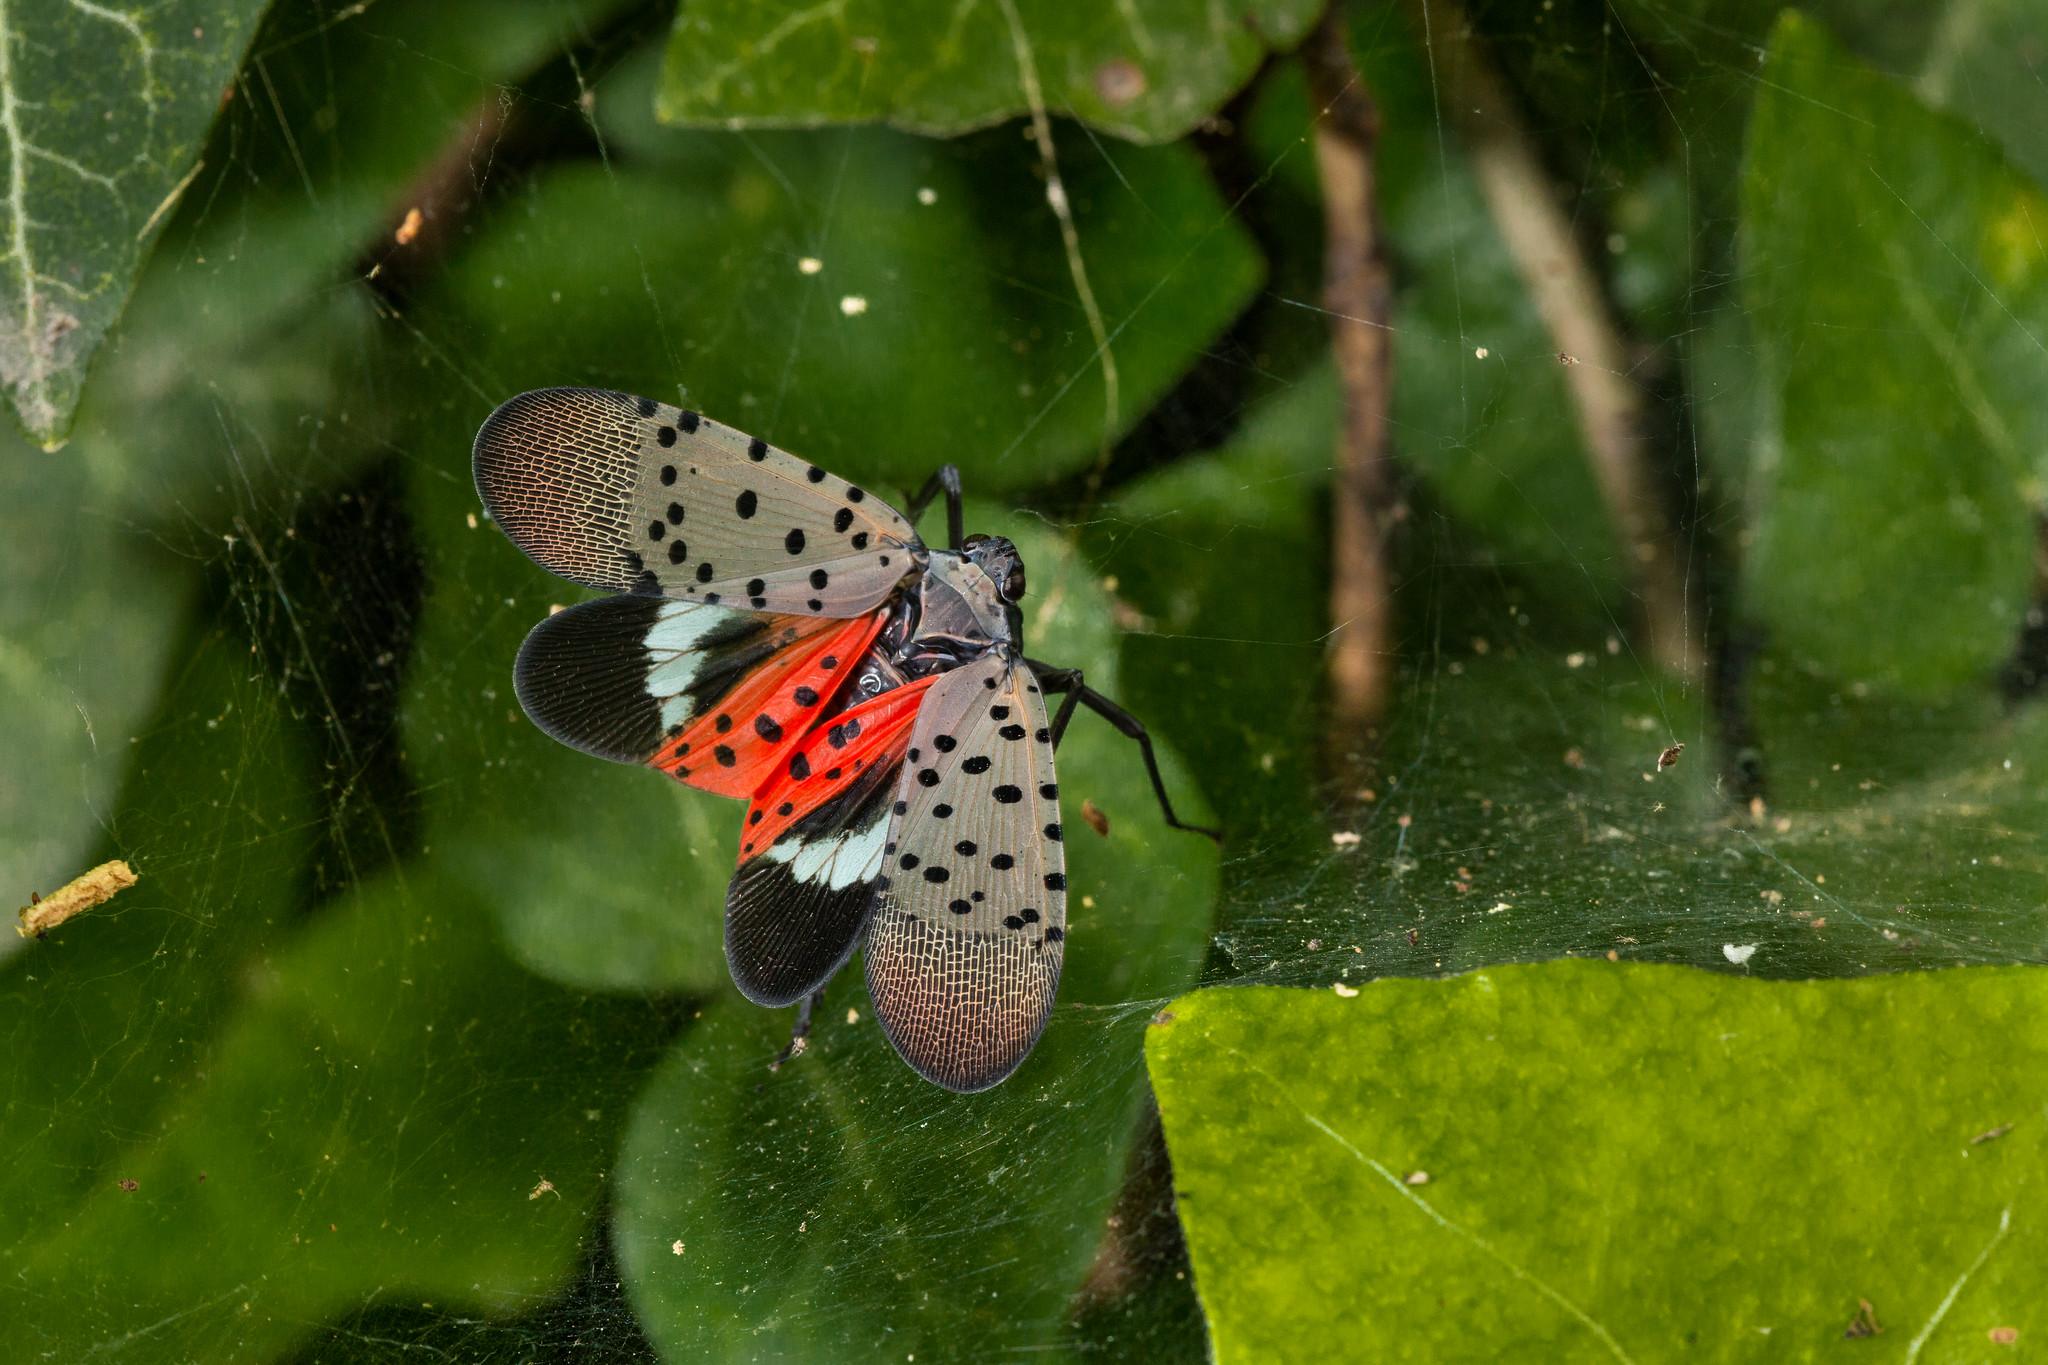 Adult spotted lanternfly with wings spread caught in a spider web.